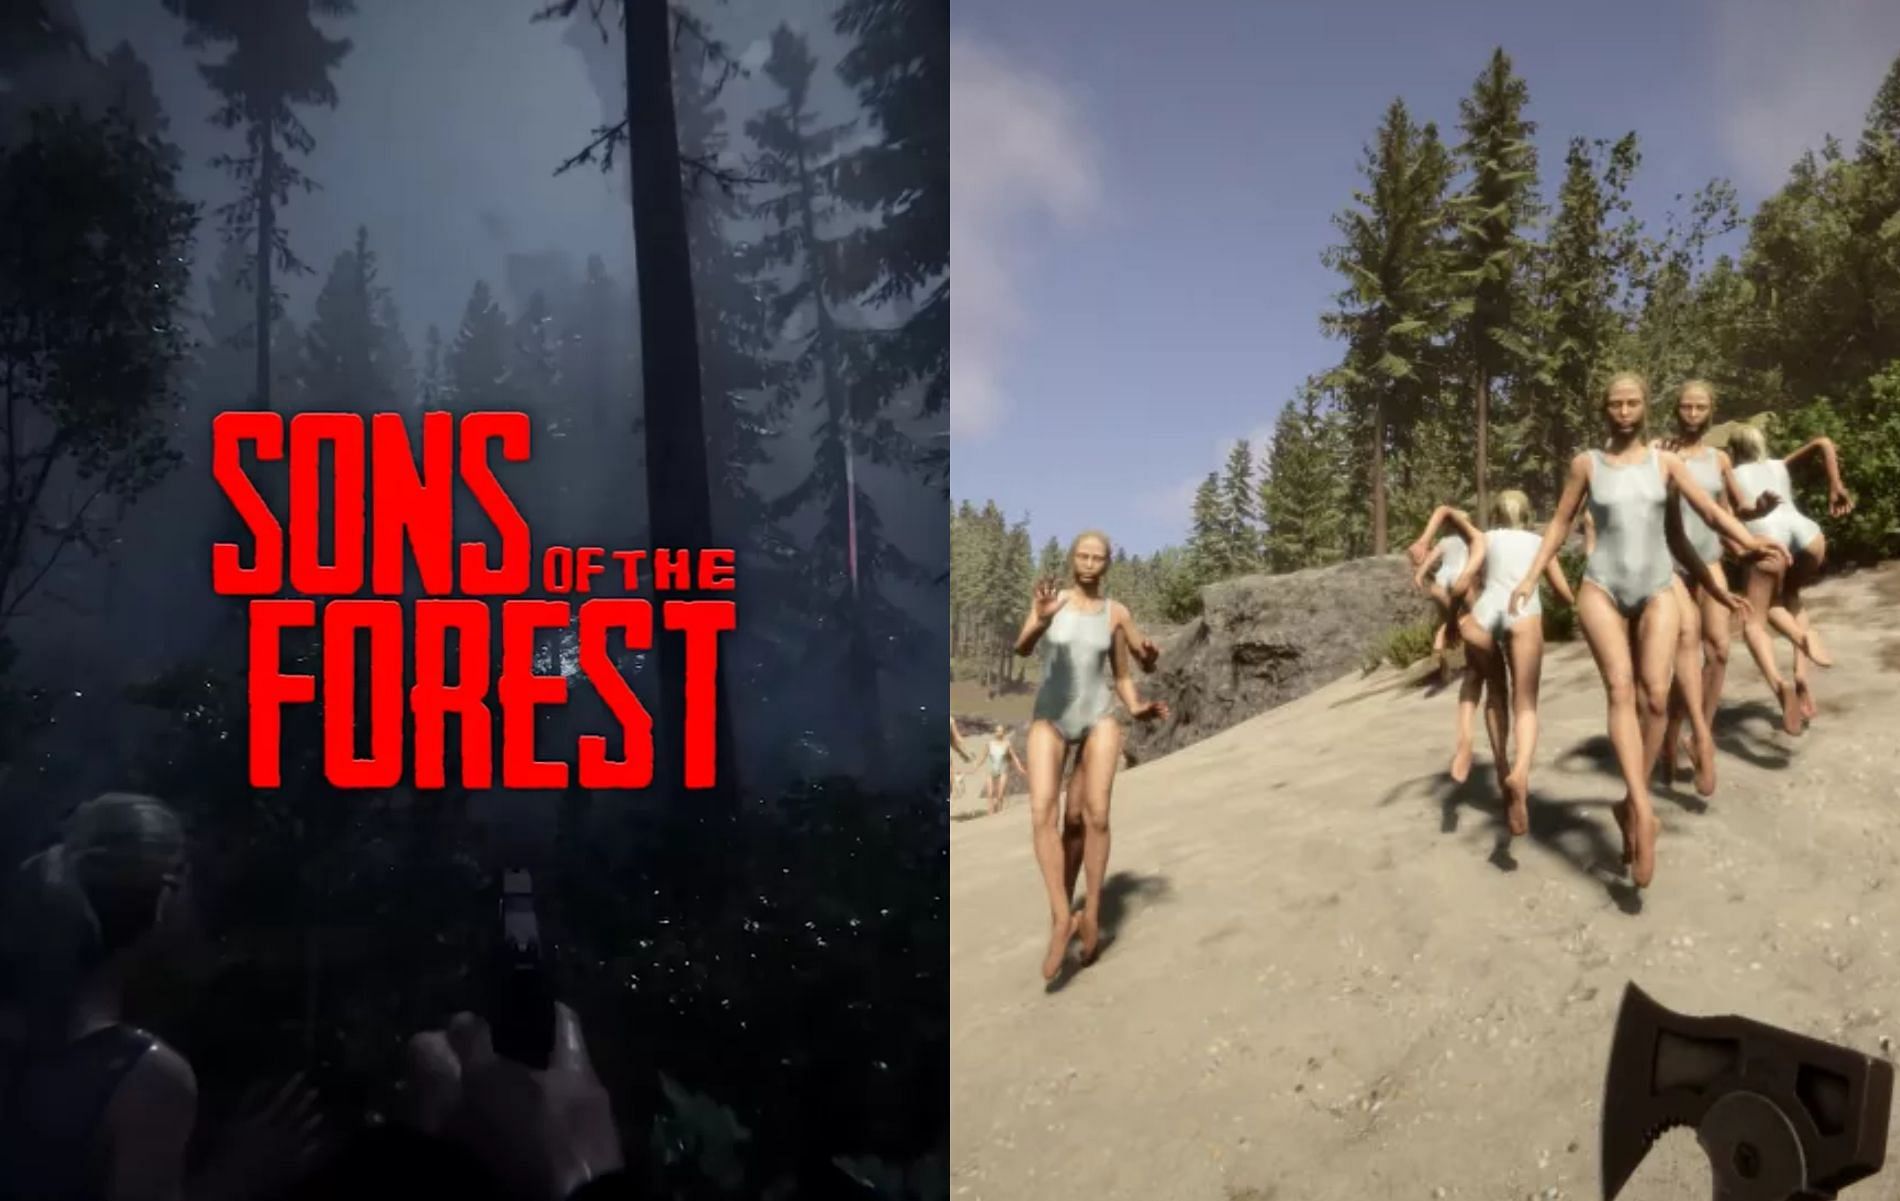 working sons of the forest mods｜TikTok Search